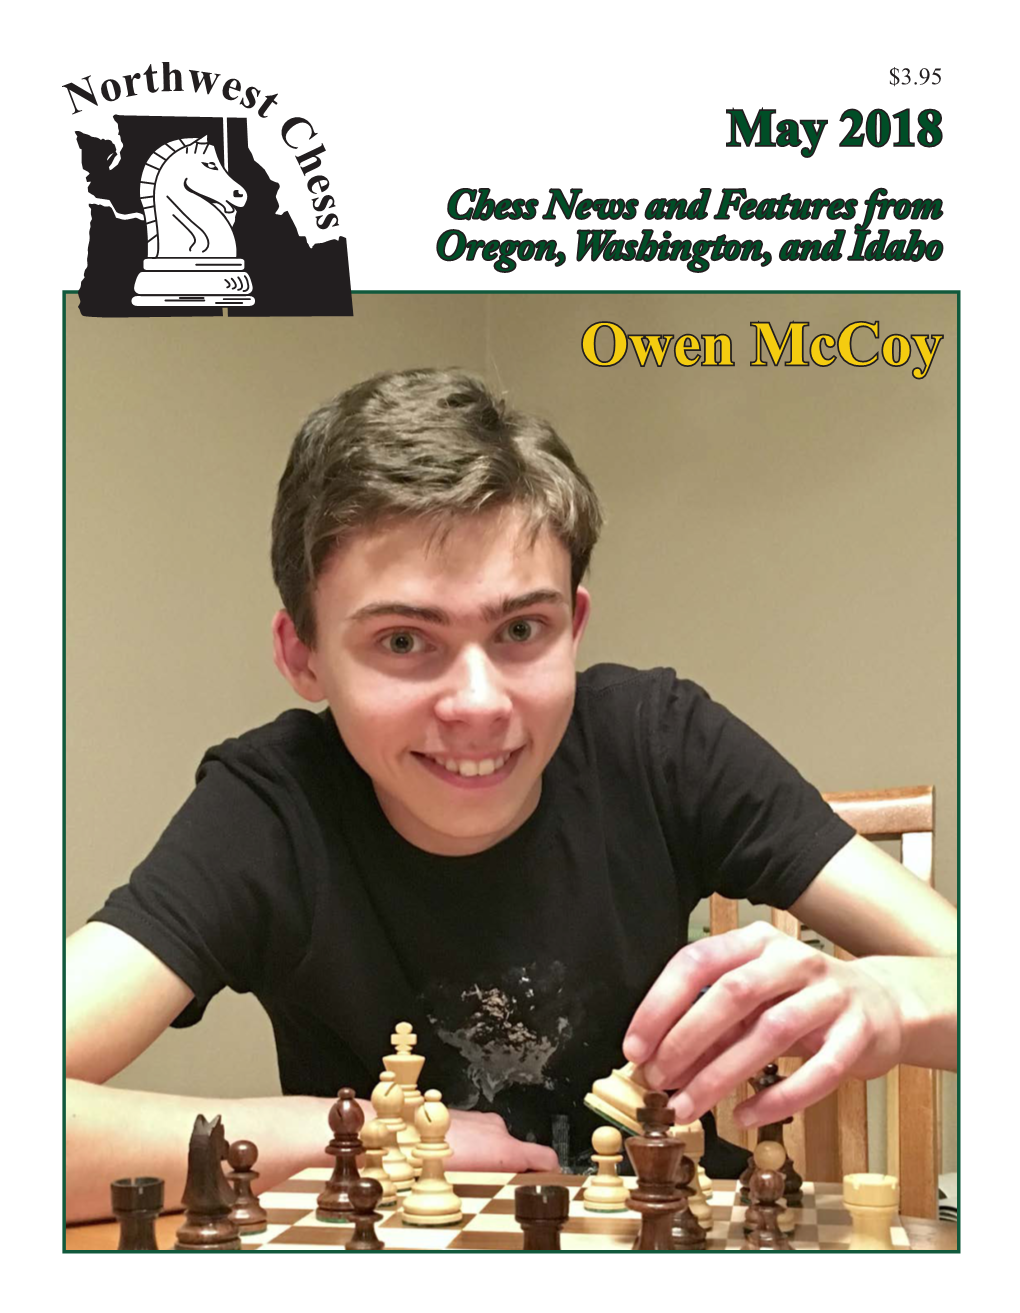 Owen Mccoy on the Front Cover: Northwest Chess US Chess Master Owen Mccoy